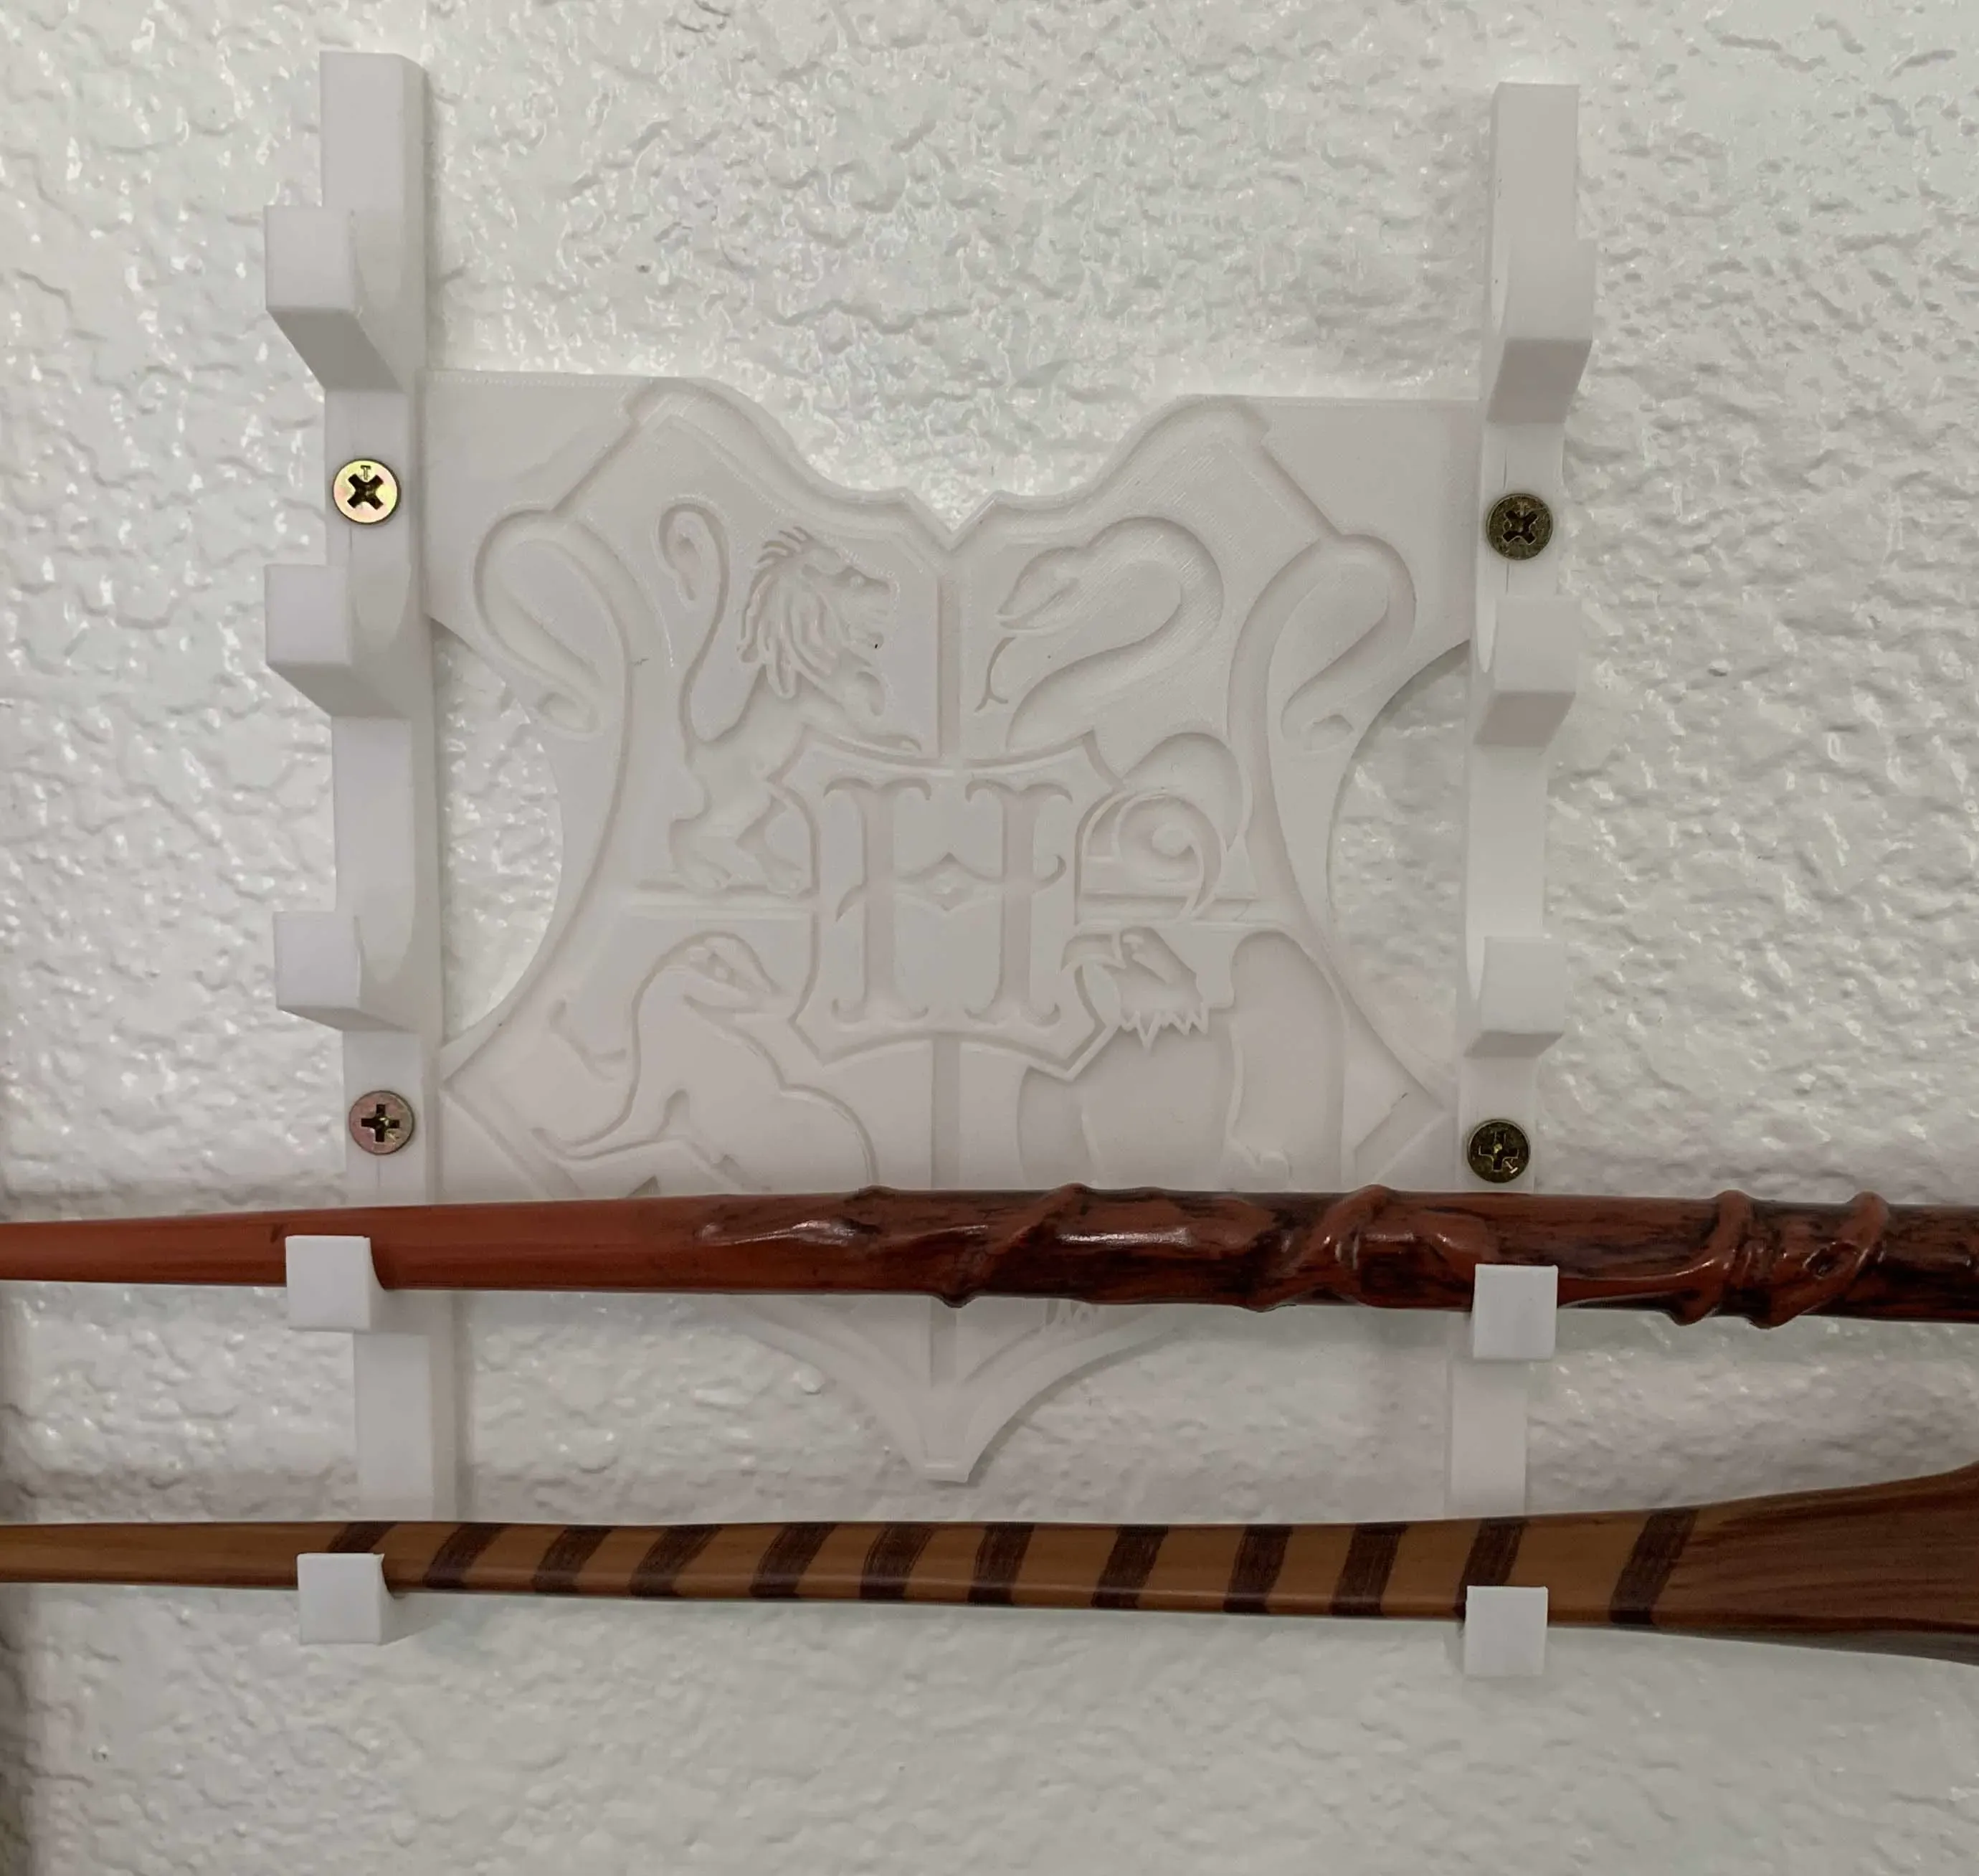 Harry Potter Wand Holder Wall Mount